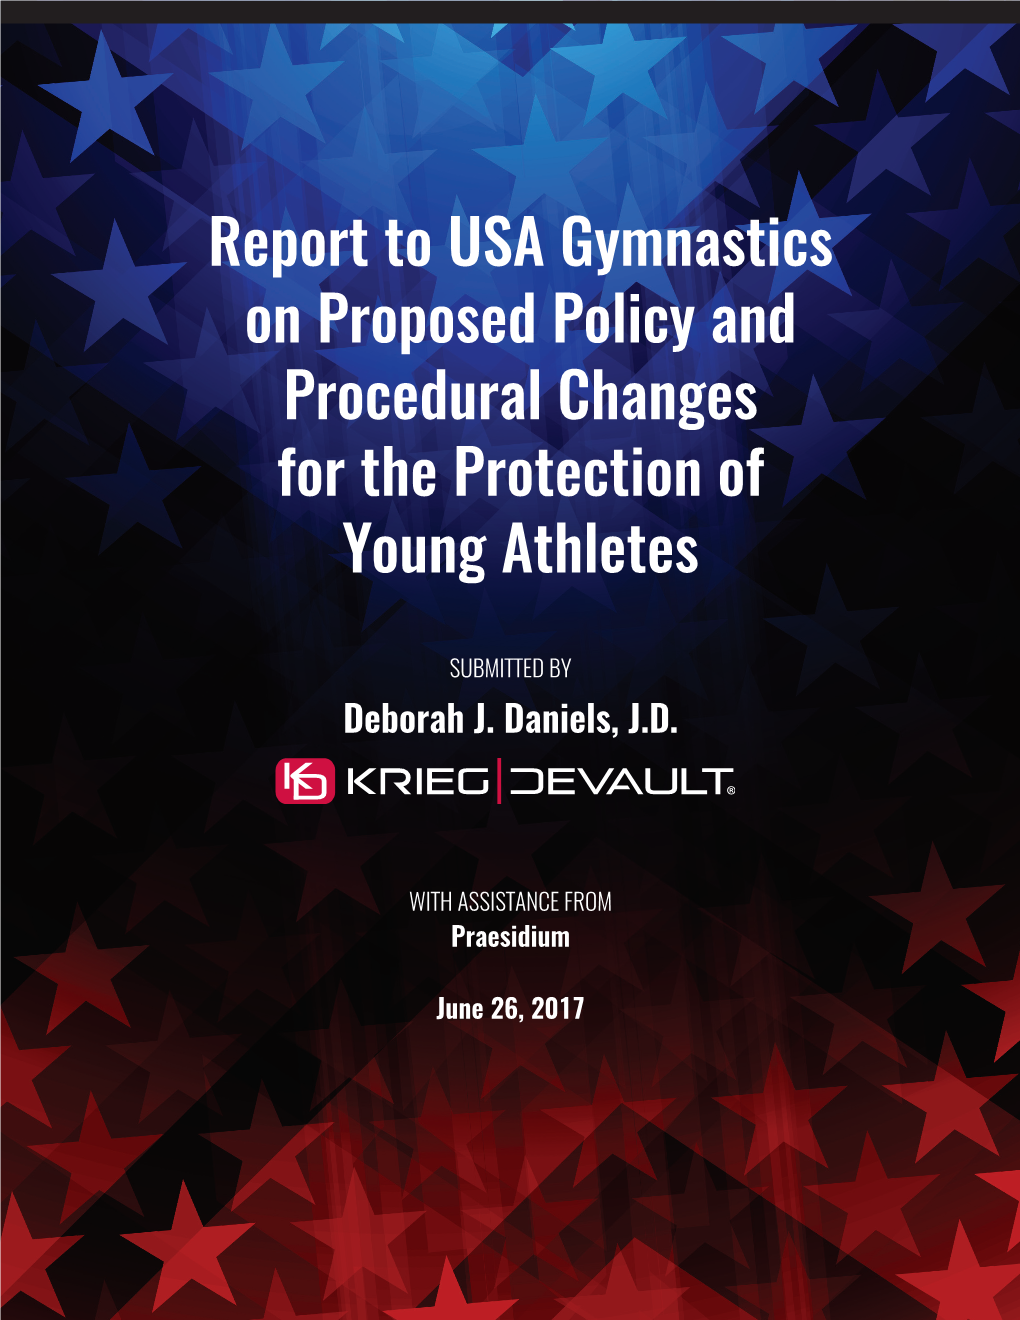 Report to USA Gymnastics on Proposed Policy and Procedural Changes for the Protection of Young Athletes